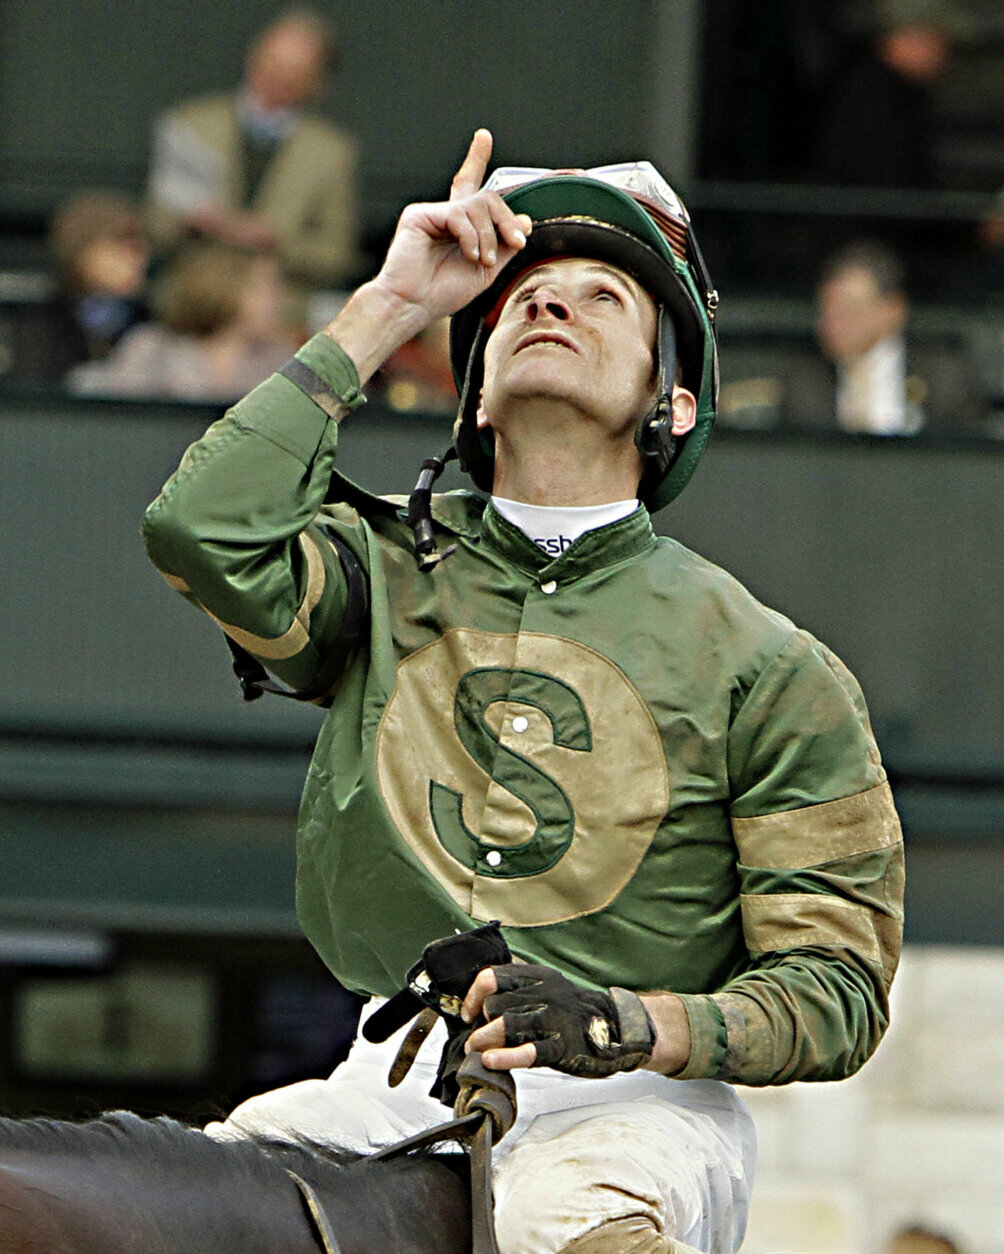 Jockey Joe Rocco, Jr., celebrates as he heads to the trophy presentation after riding Don't Tell Sophia to victory in the $500,000 Spinster Stakes horse race at Keeneland Race Course in Lexington, Ky., Sunday, Oct. 5, 2014. (AP Photo/Garry Jones)